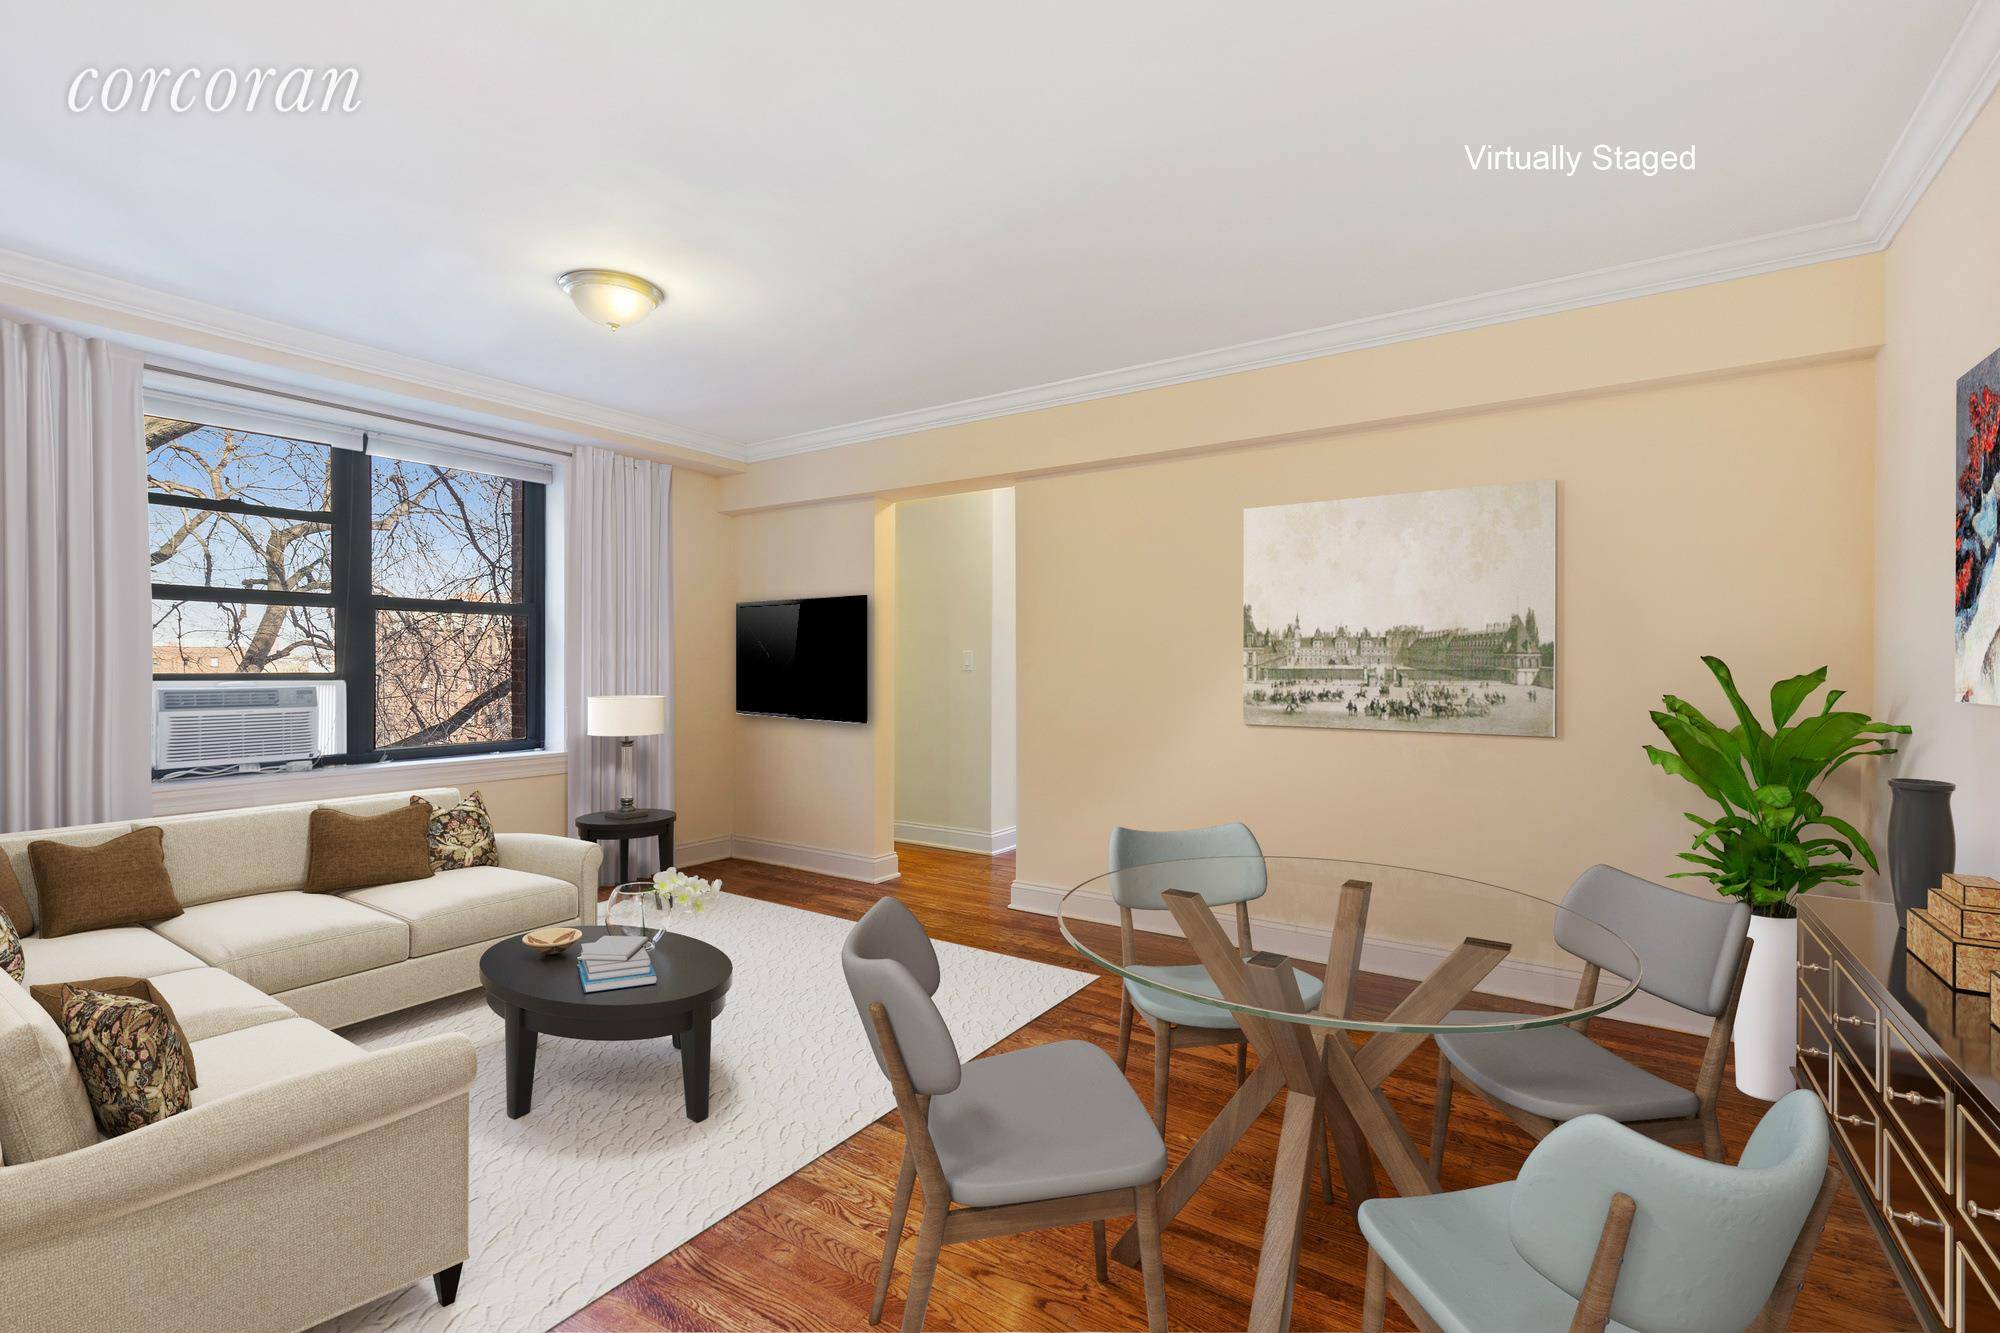 MINT CONDITION ONE BEDROOM NEAR FORT TRYON PARK This pristine high floor home has been newly refreshed to absolute perfection.